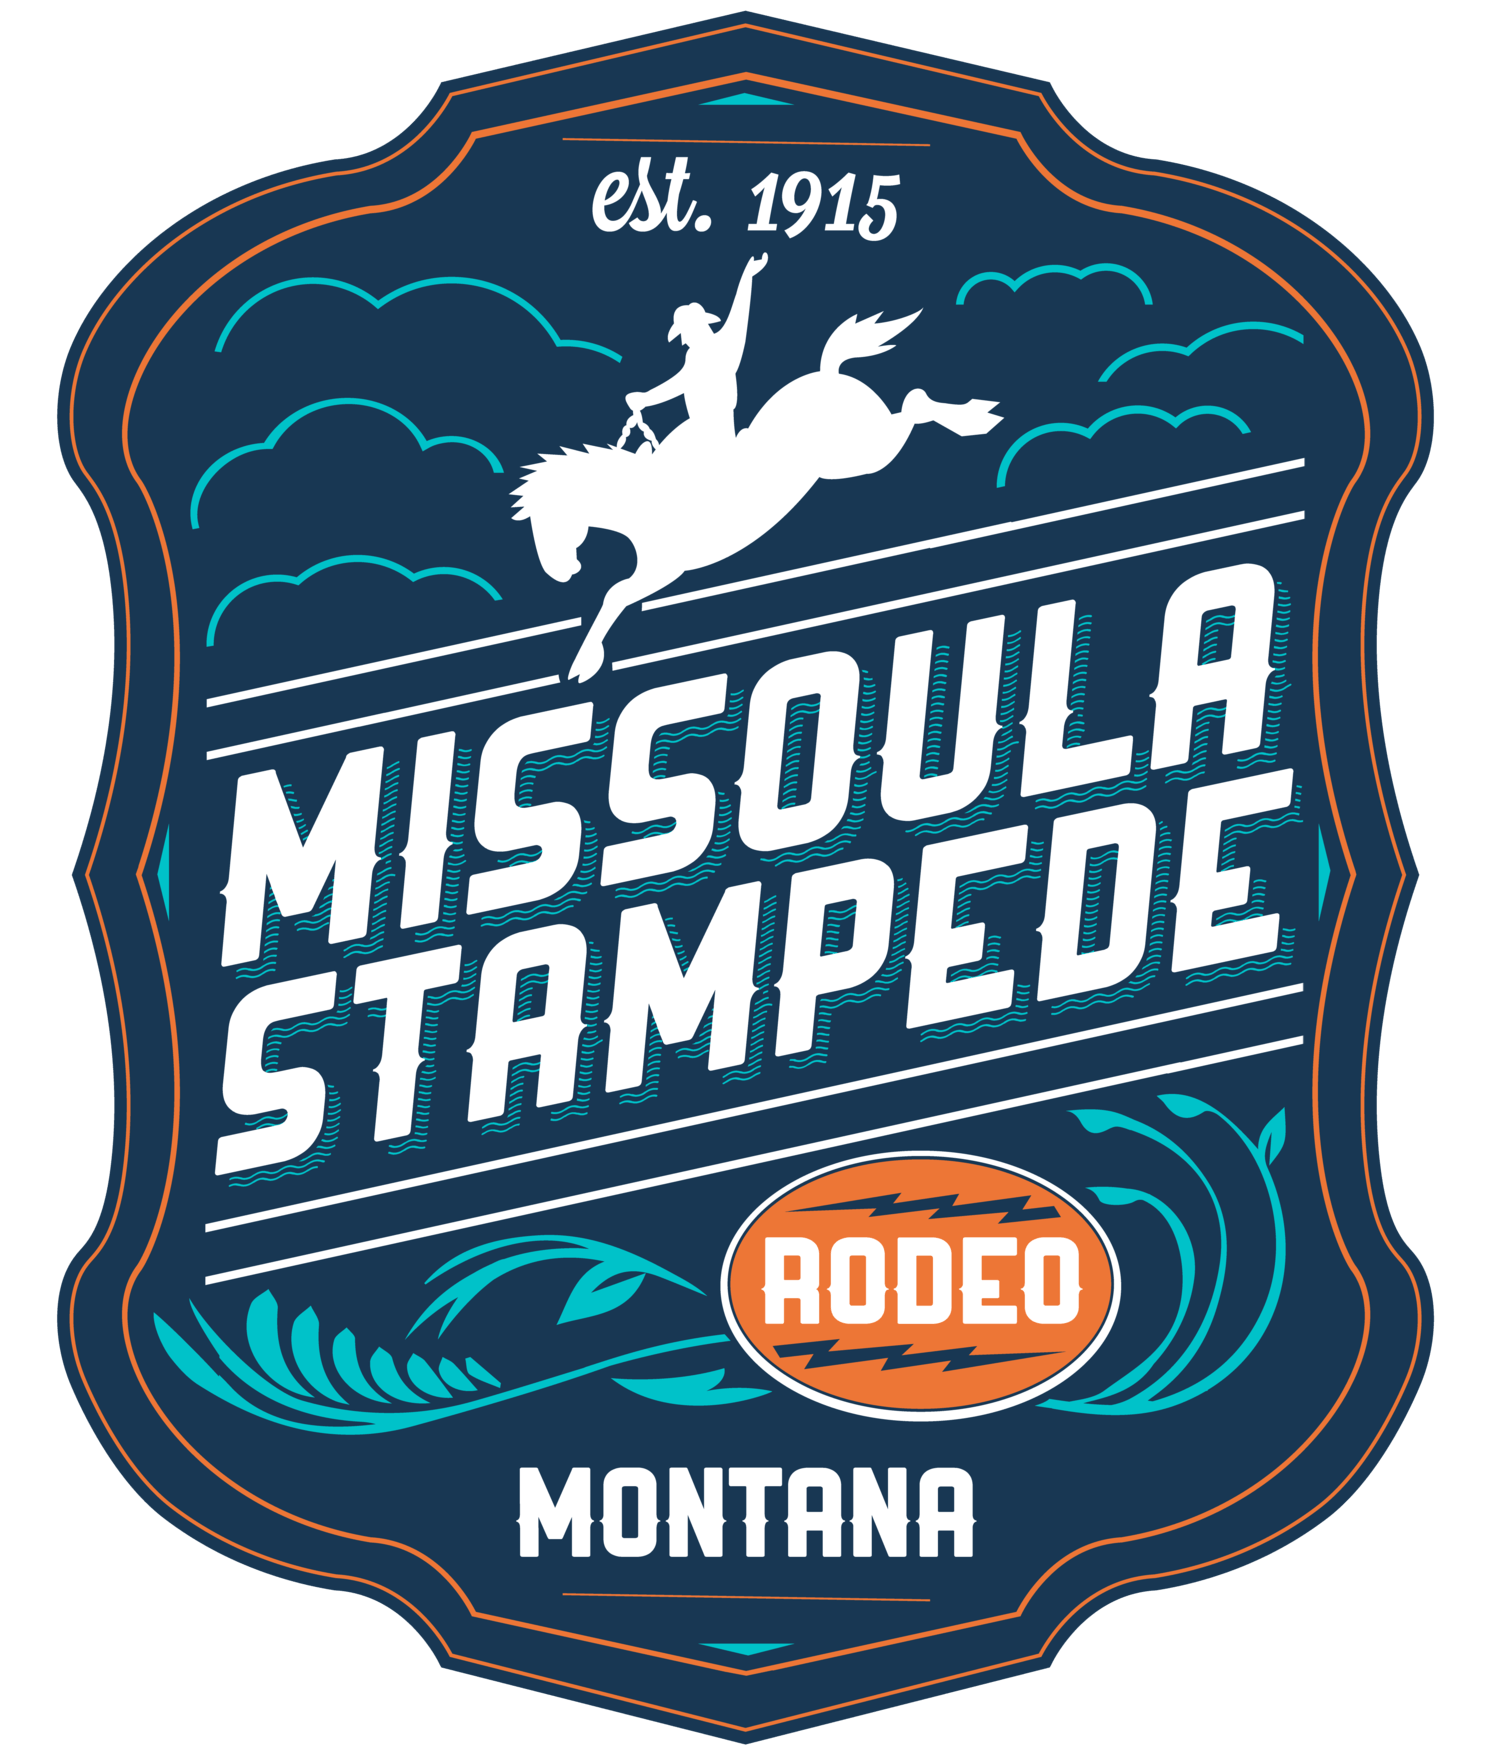 Rodeo Logo - Check out the new Missoula Stampede Rodeo Logo!